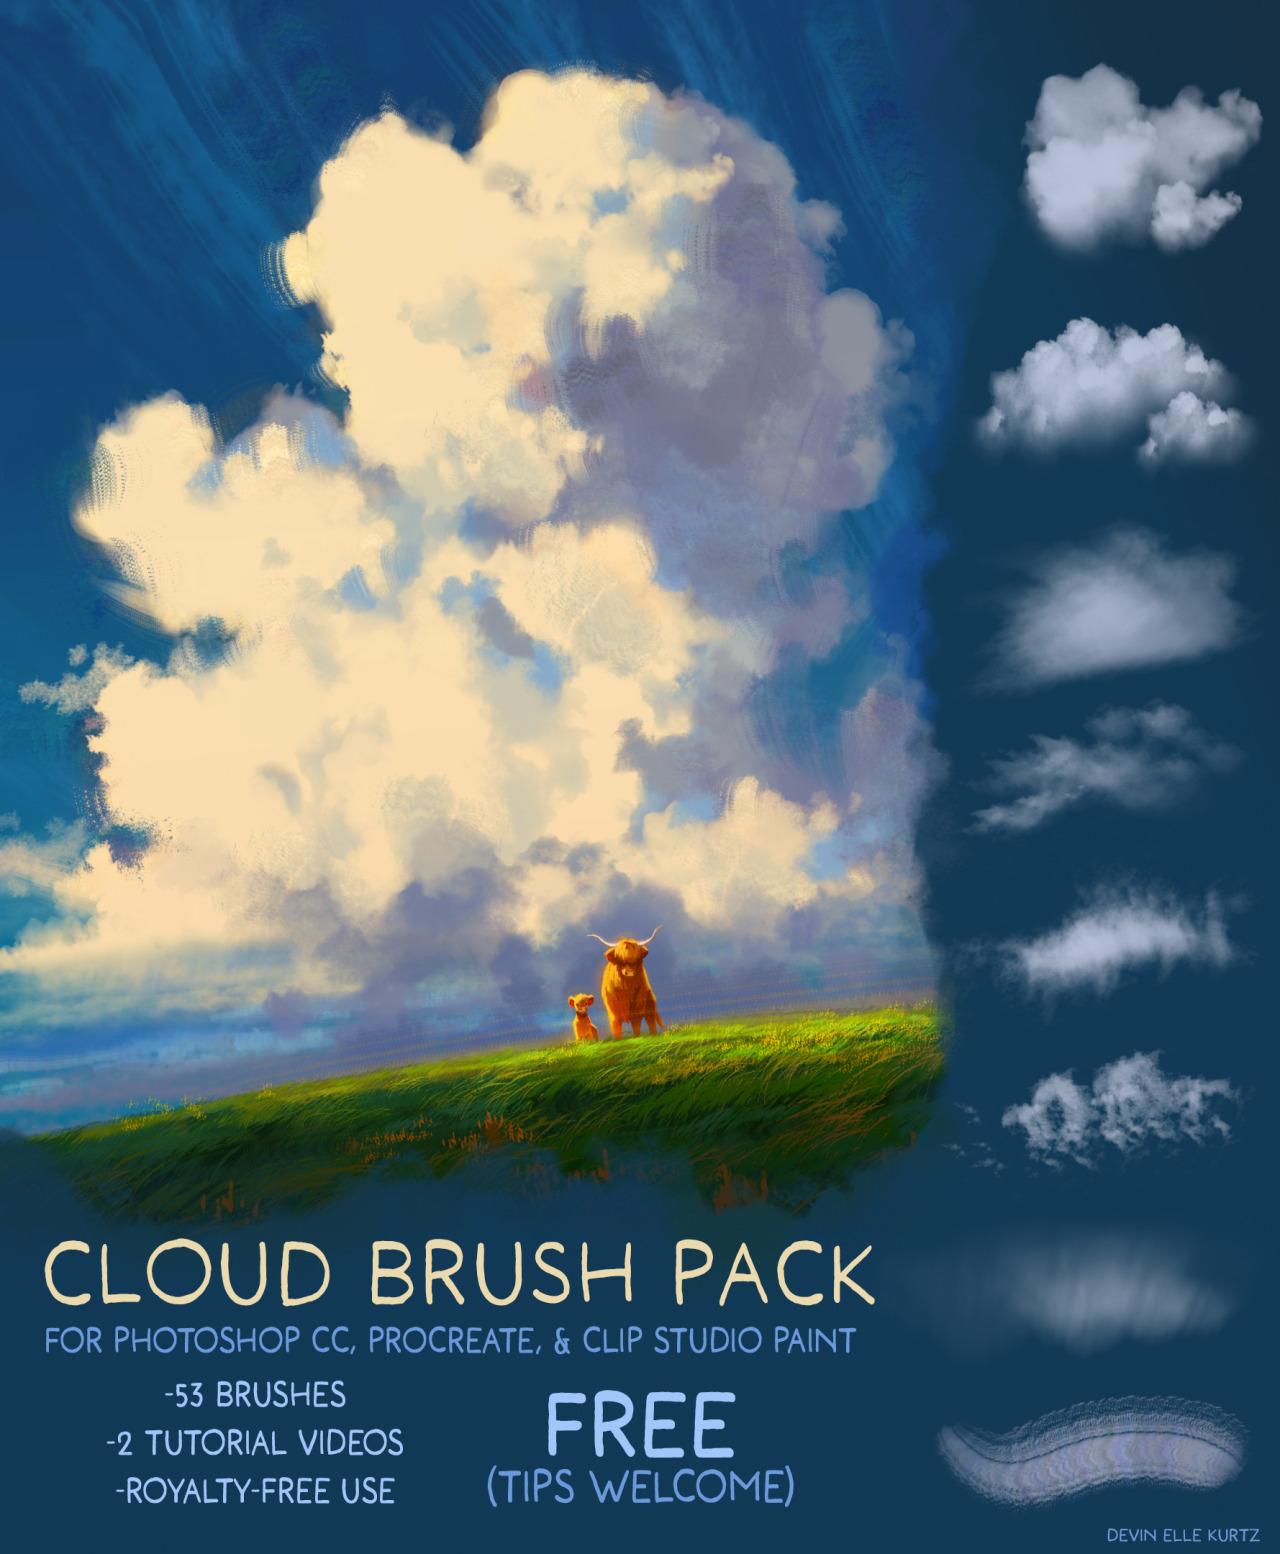 Cloud Brush Pack for Photoshop CC, Procreate, and Clip Studio Paint! [Image is of two small cows on a grass field in front of a cloudy sky] 53 brushes, 2 tutorial videos, royalty free use. Free, tips welcome! By Devin Elle Kurtz